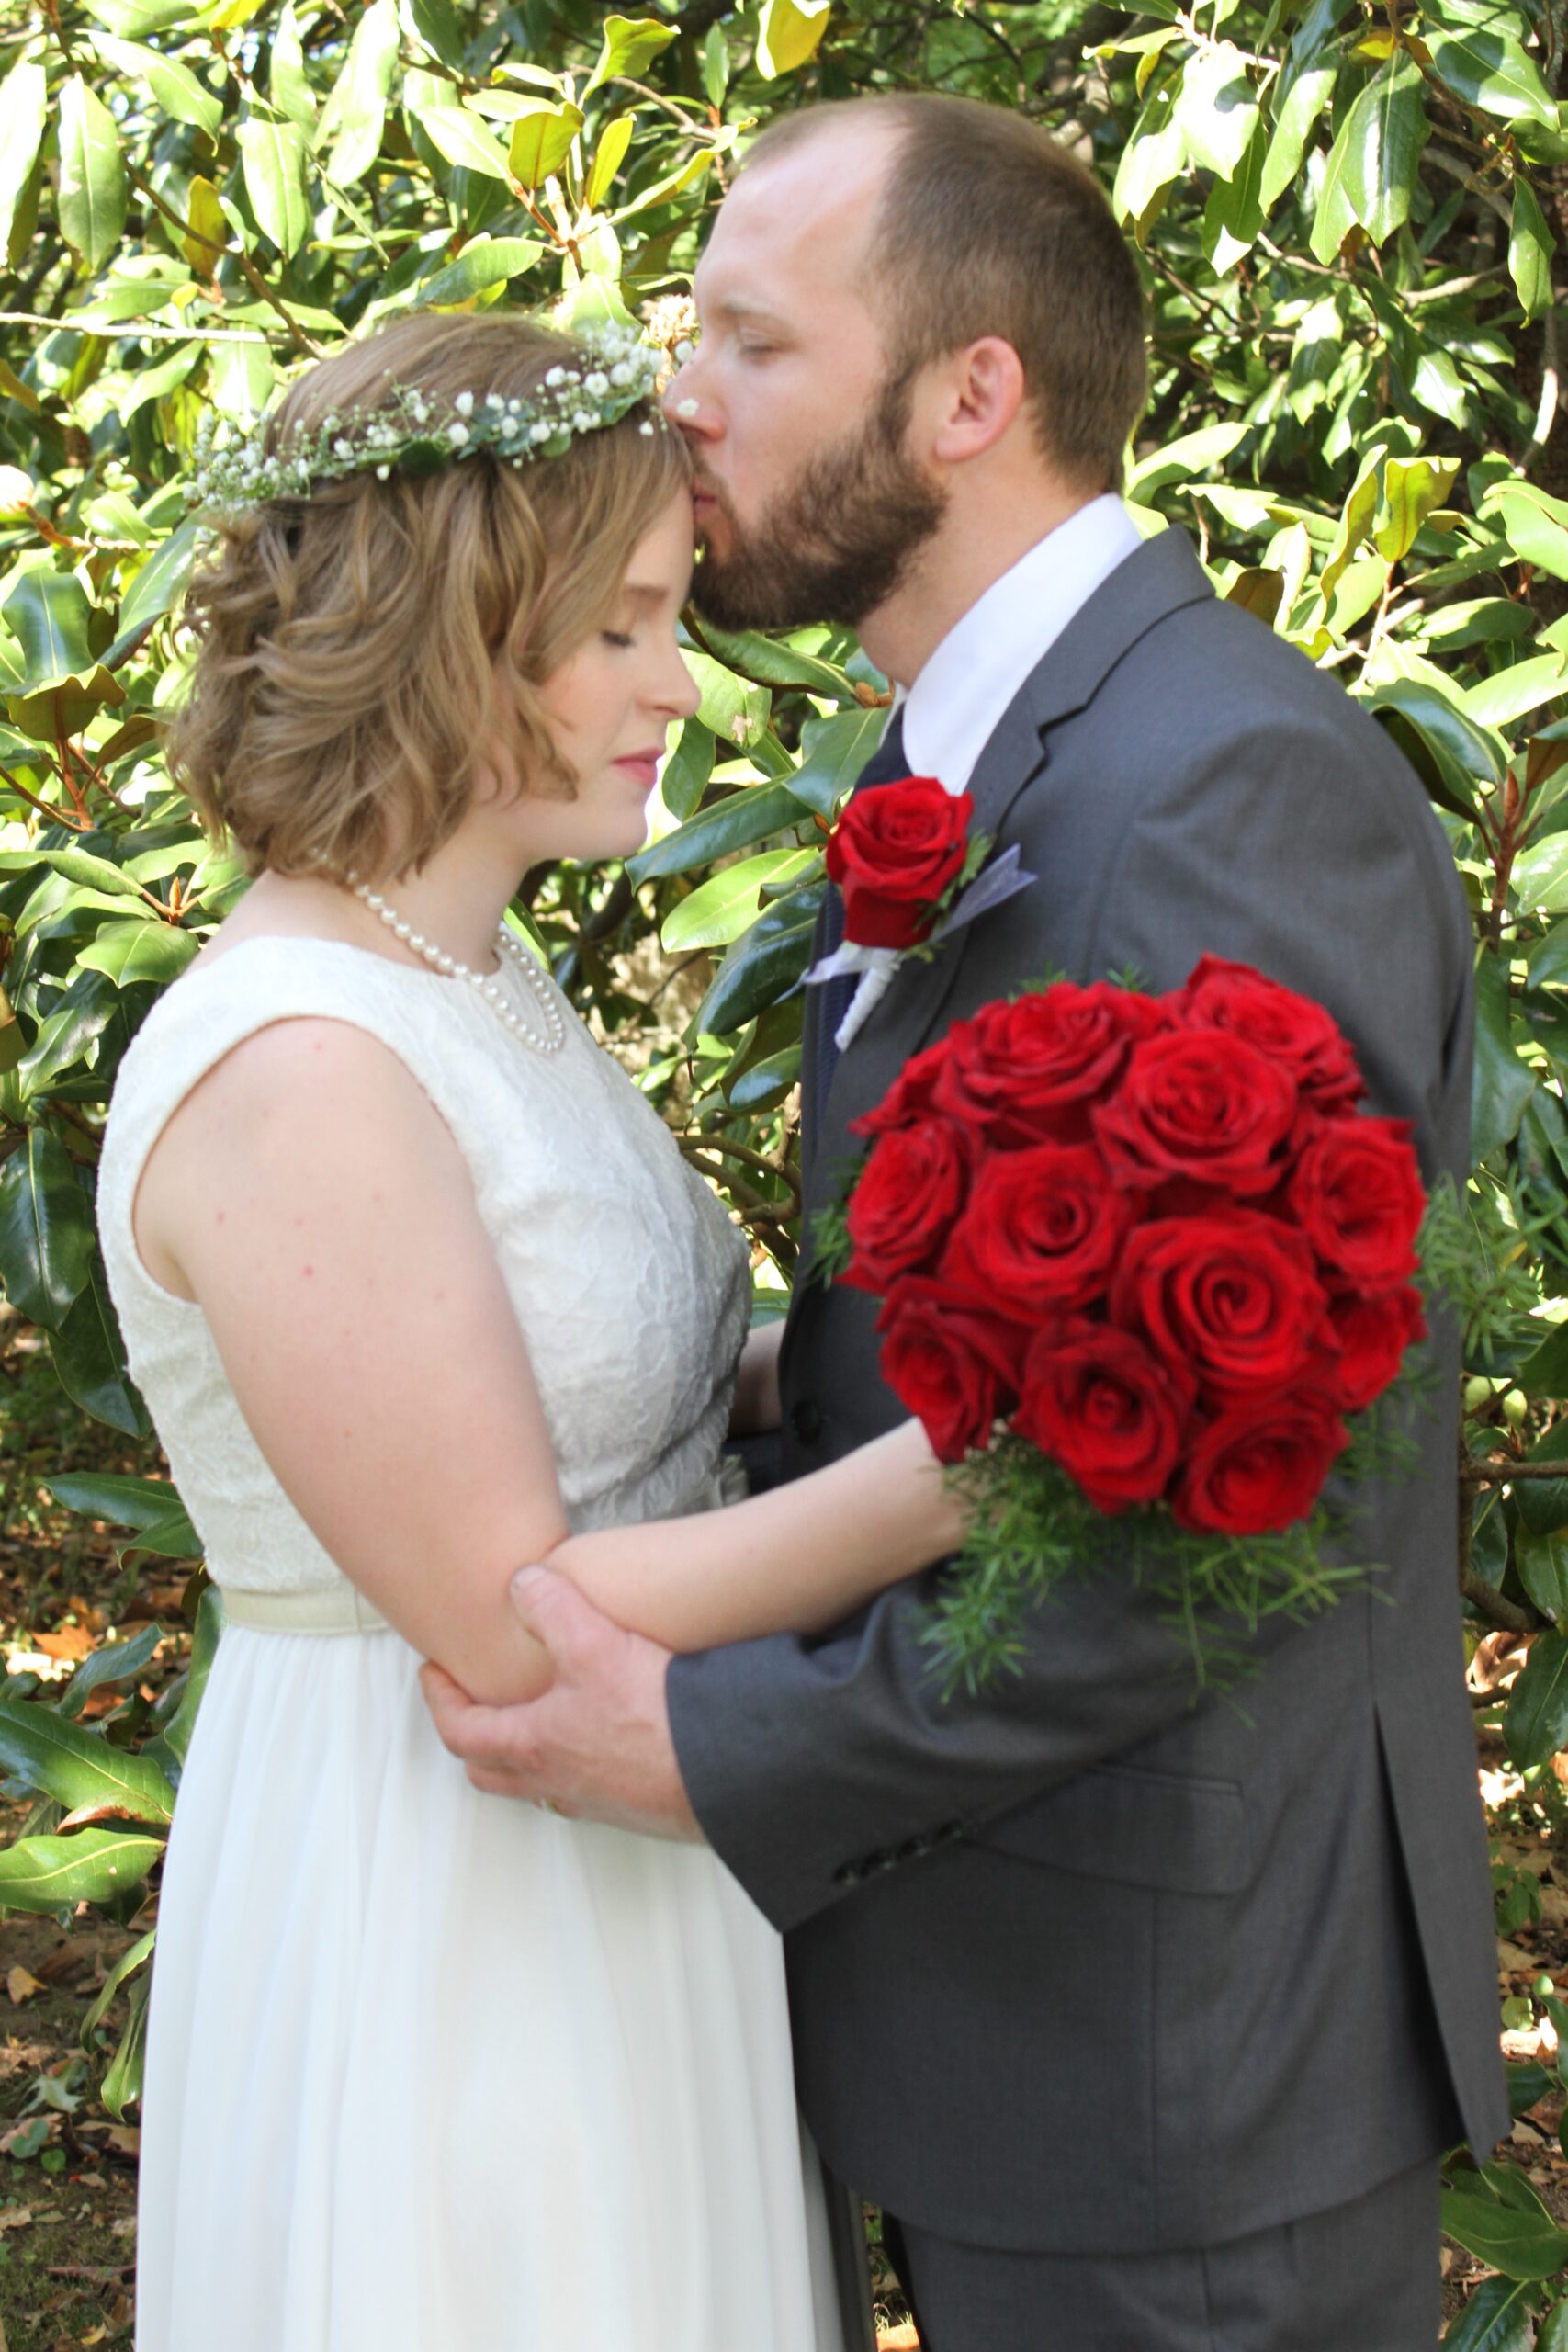 Groom, wearing a grey suit and red rose boutonniere, kissed the bride on the forehead. The bride, wearing a white lace sundress and flower crown, holds a large bouquet of red roses. 